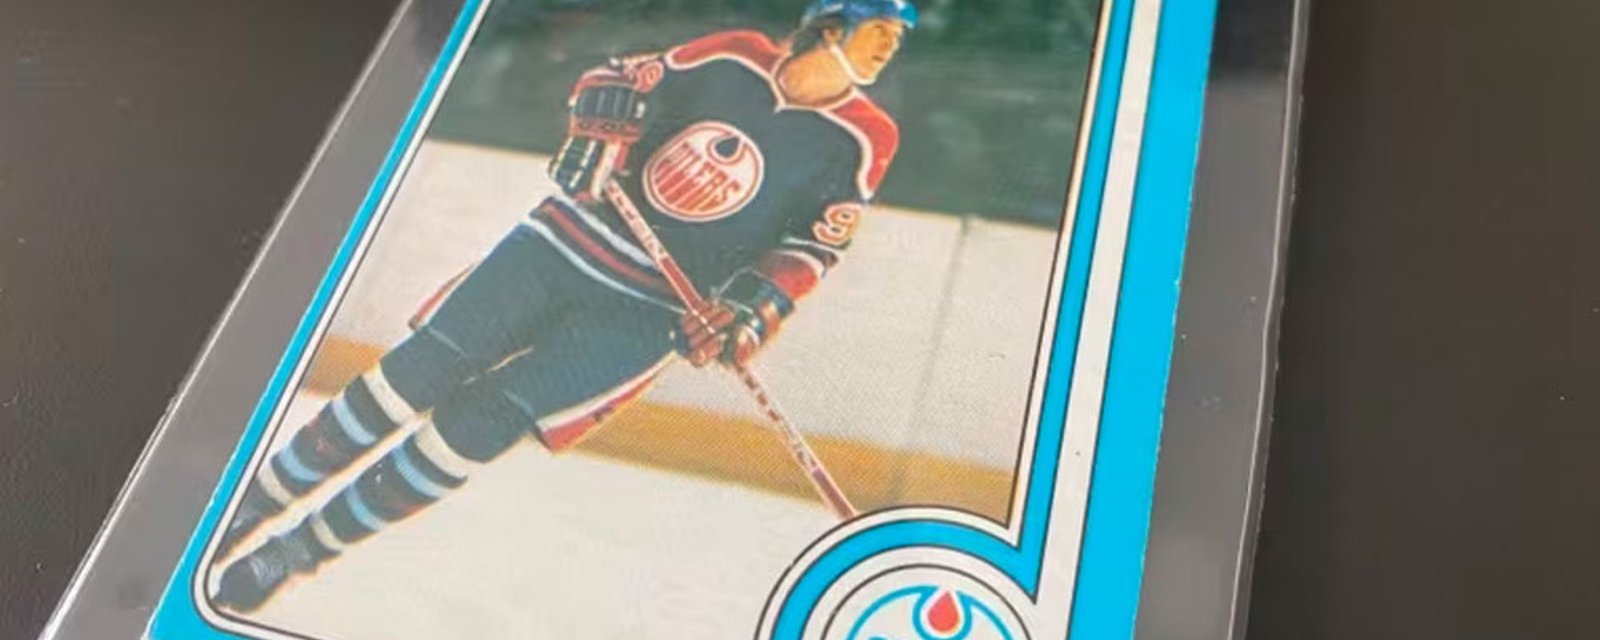 How much would you pay for 20 'mint condition' Gretzky rookie cards?